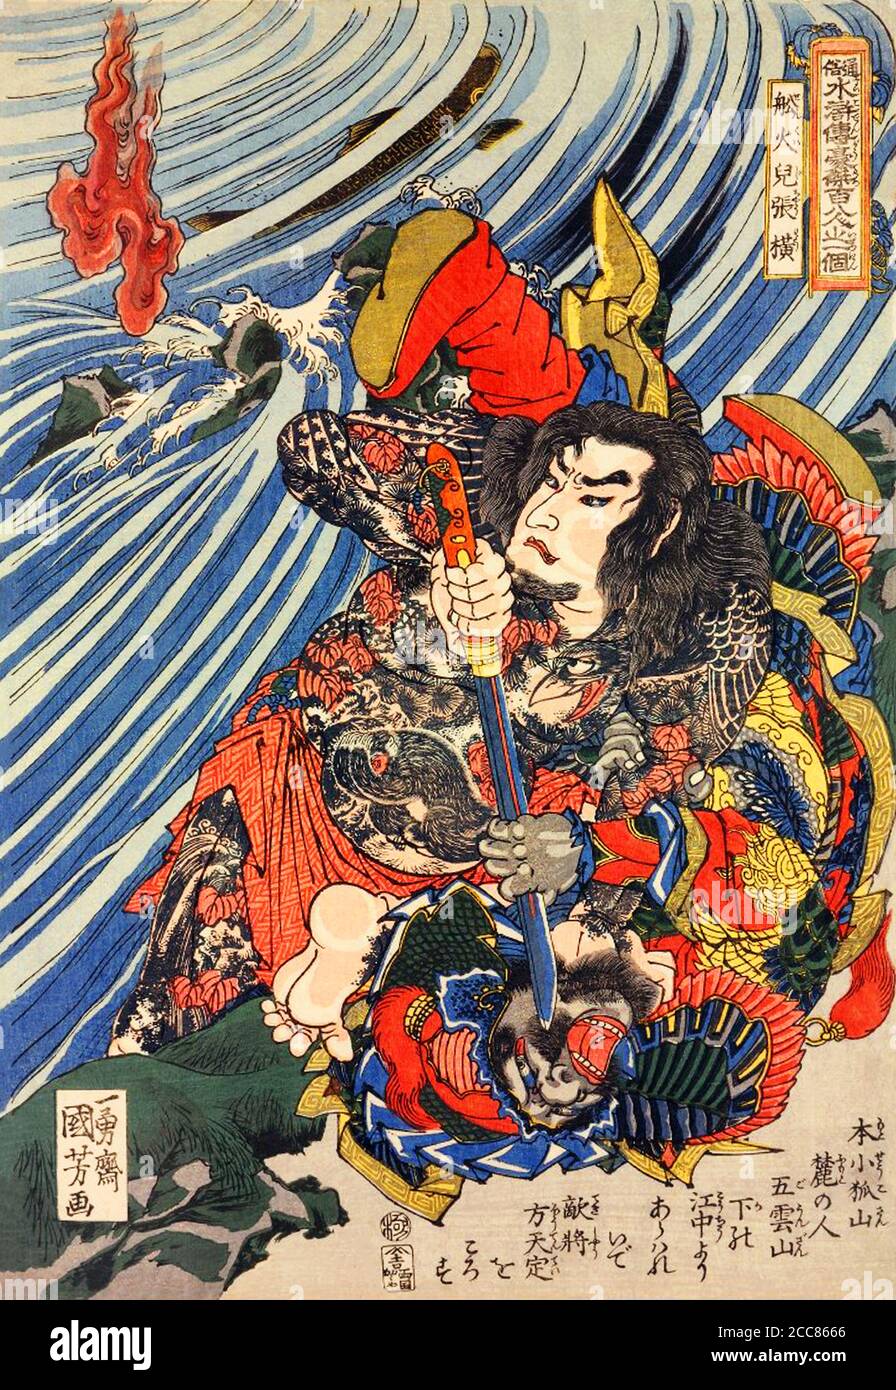 Japan: Zhang Heng or Senkaji Choo, one of the 'One Hundred and Eight Heroes of the Water Margin', stripped to reveal his full-body tattoos, about to kill the enemy general Hotentei with his sword, looks back at a supernatural flame appearing over the river behind him. Woodblock print by Utagawa Kuniyoshi (1797-1863), 1827-1830. The Water Margin (known in Chinese as Shuihu Zhuan, sometimes abbreviated to Shuihu, known as Suikoden in Japanese, as well as Outlaws of the Marsh, Tale of the Marshes, All Men Are Brothers, Men of the Marshes, or The Marshes of Mount Liang in English, is a 14th centur Stock Photo